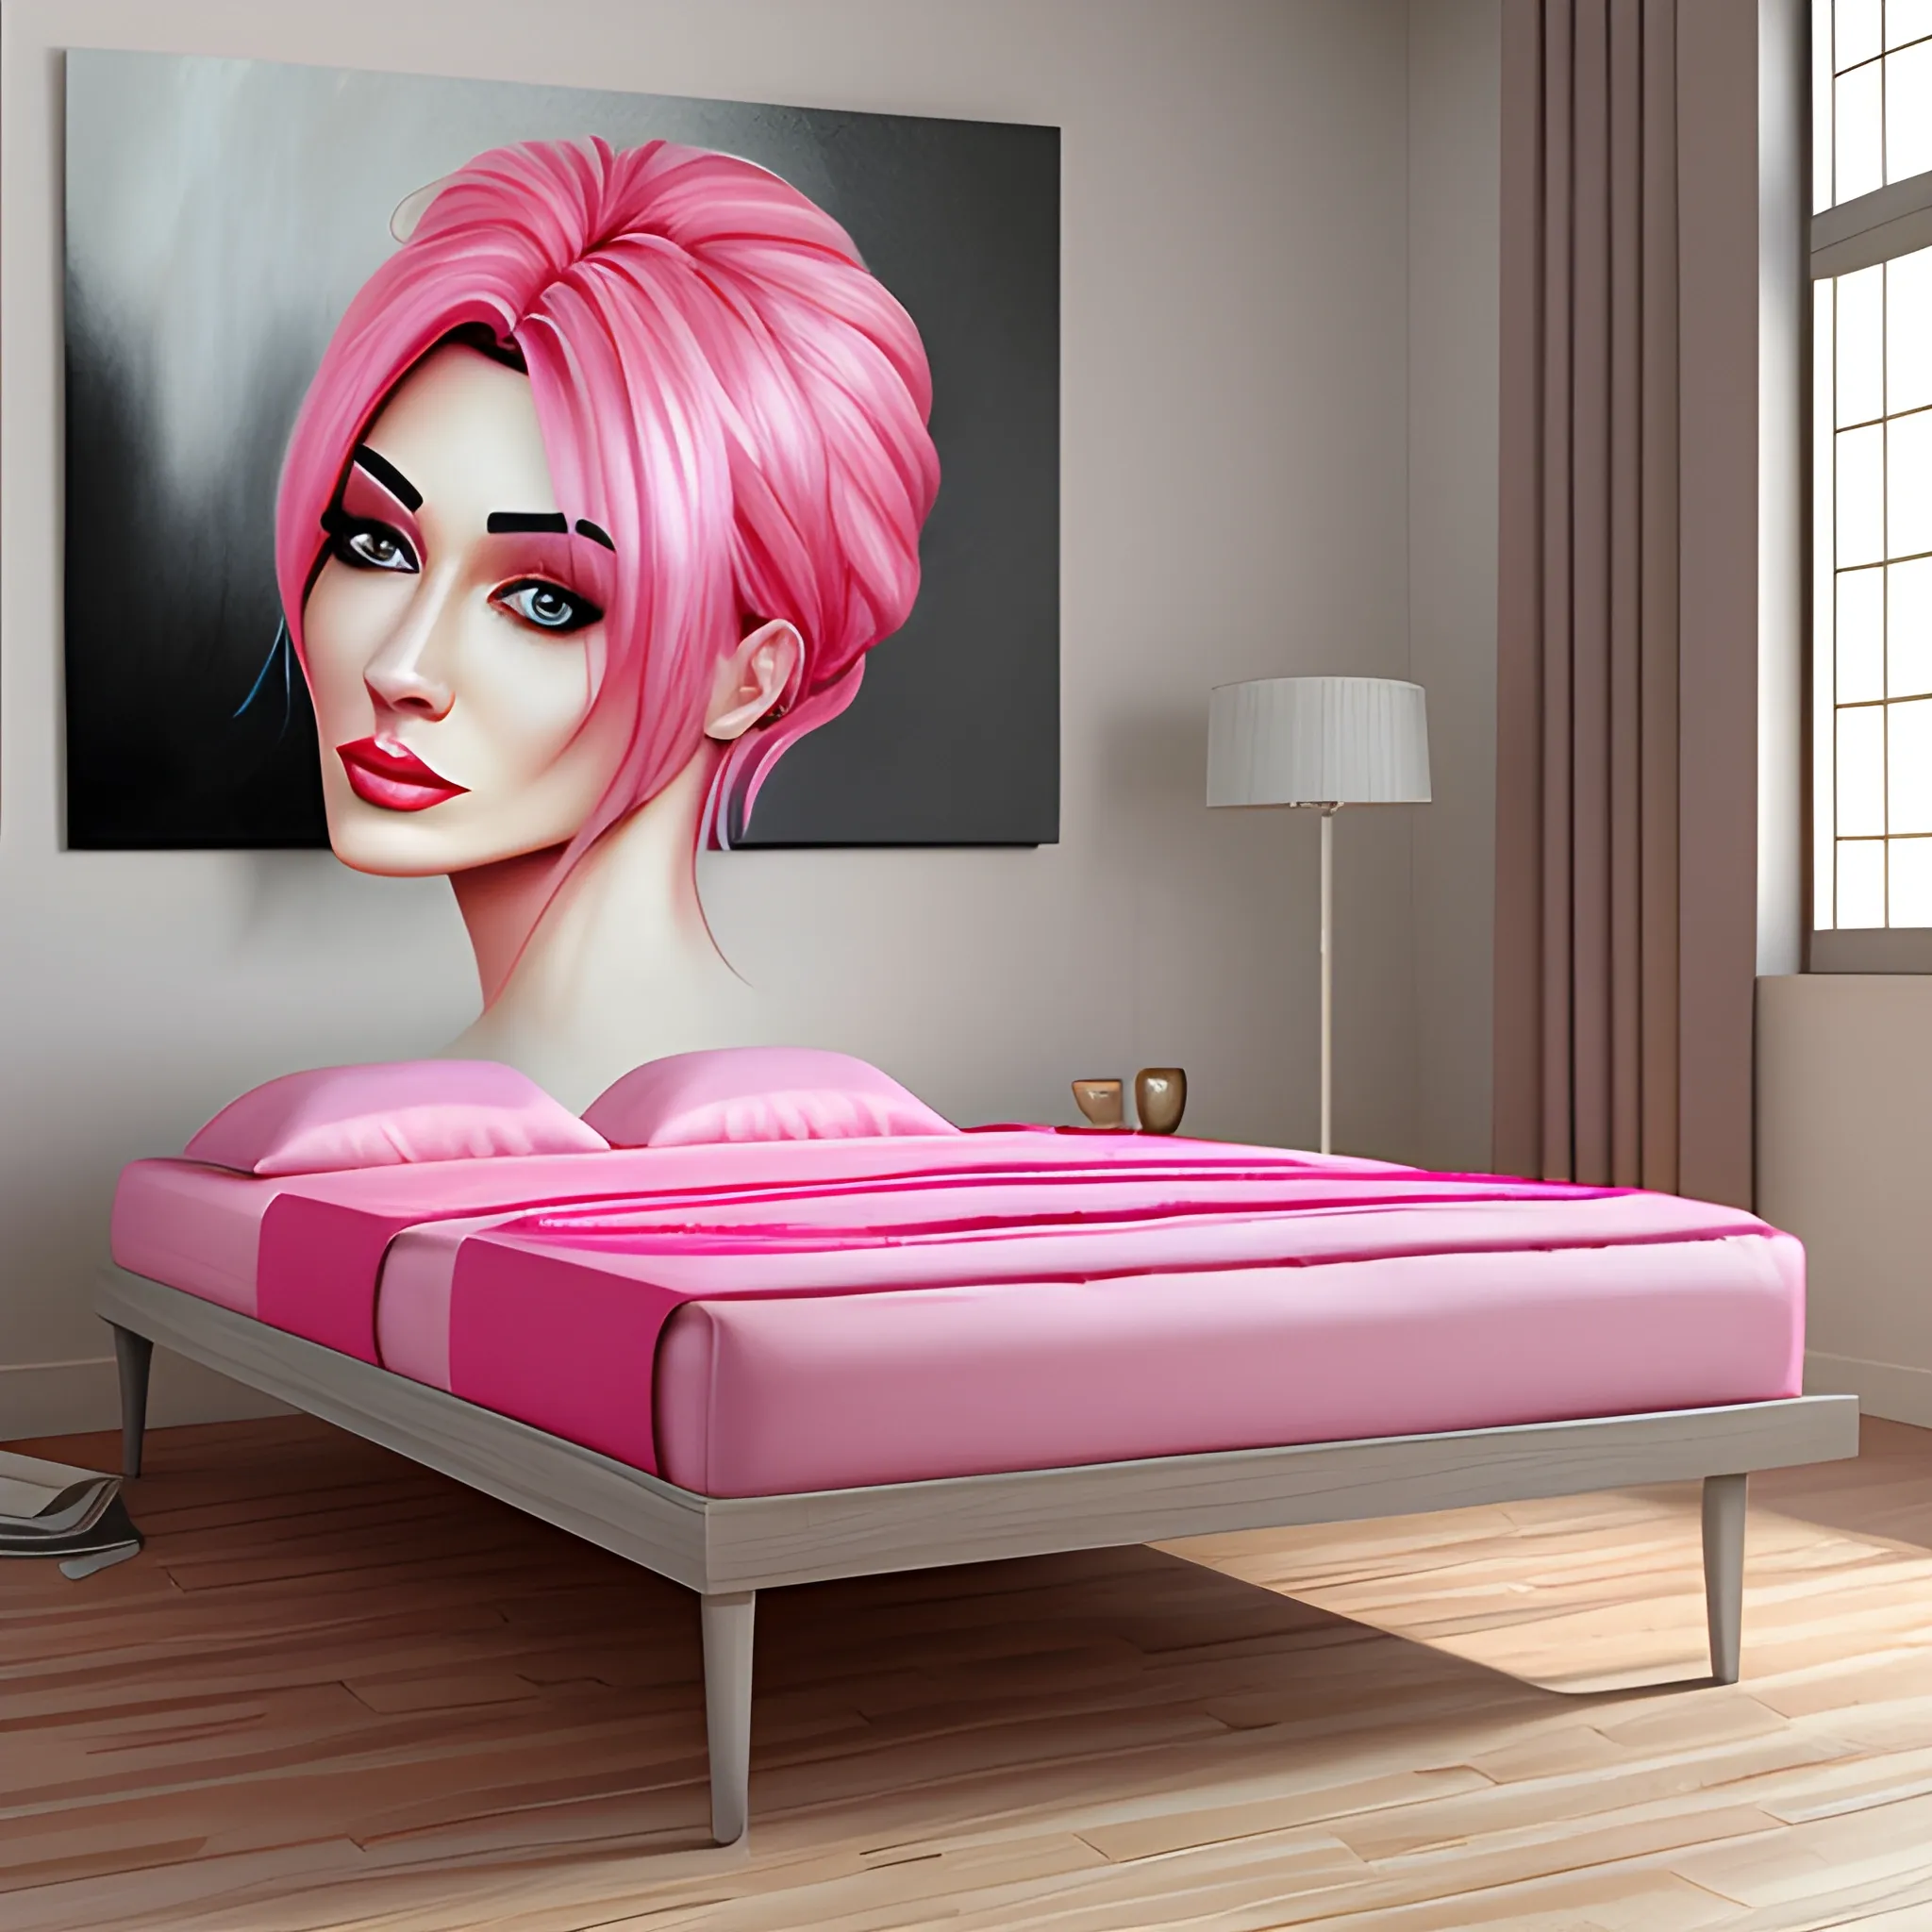 realistic young girl with pink hair, bed, house 
, 3D, Pencil Sketch, Oil Painting